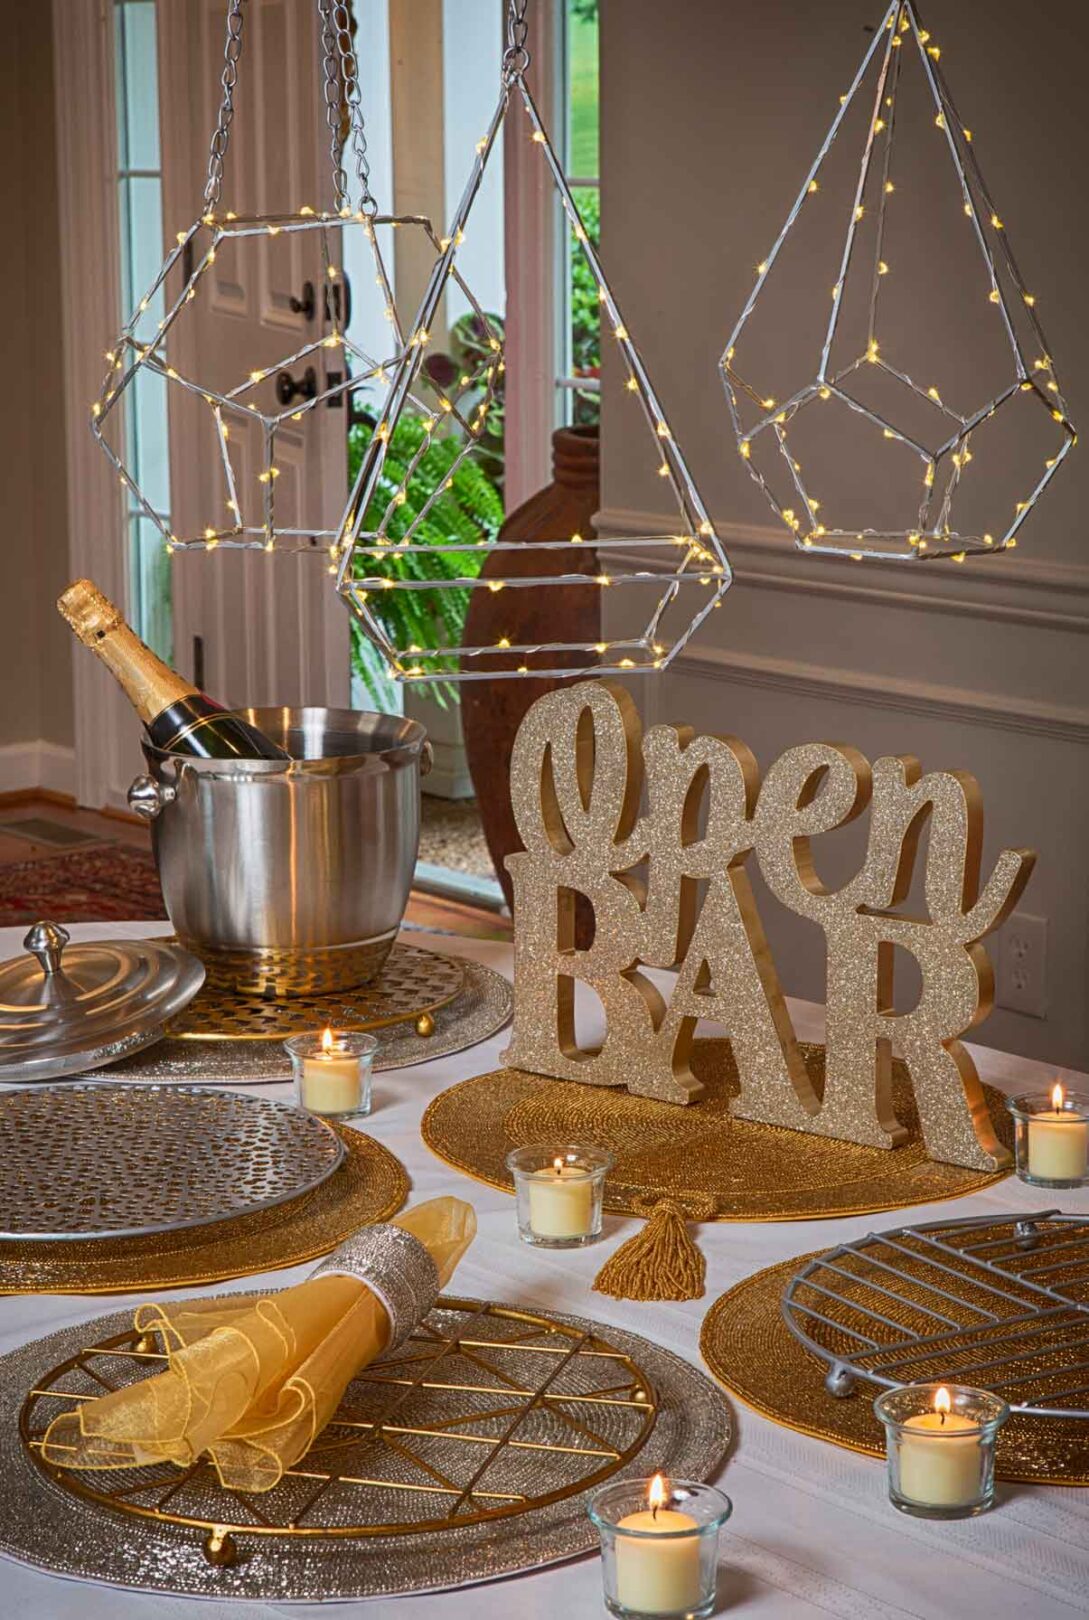 A table set up with home decor bar dinner items